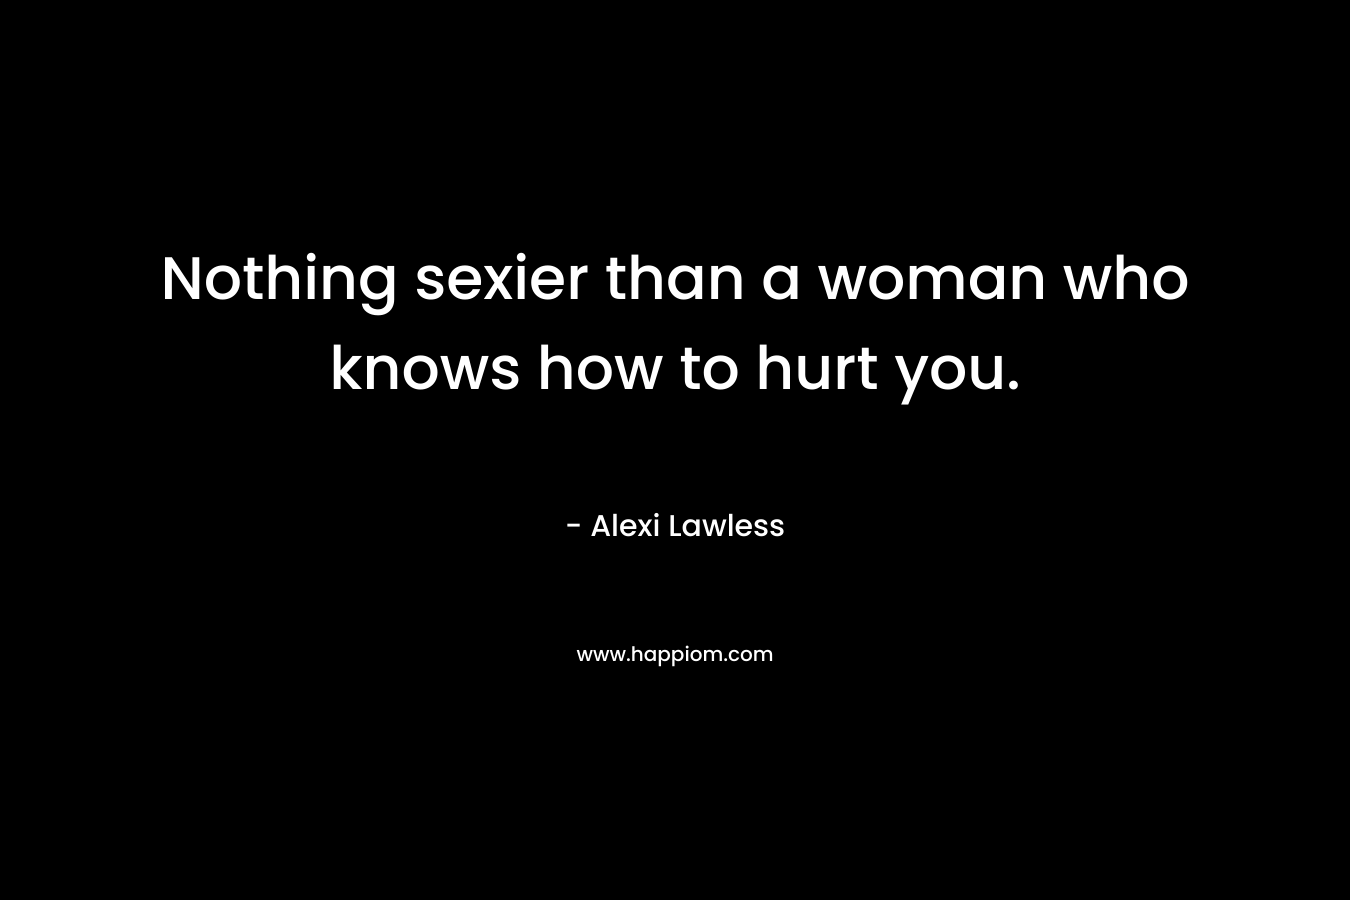 Nothing sexier than a woman who knows how to hurt you. – Alexi Lawless